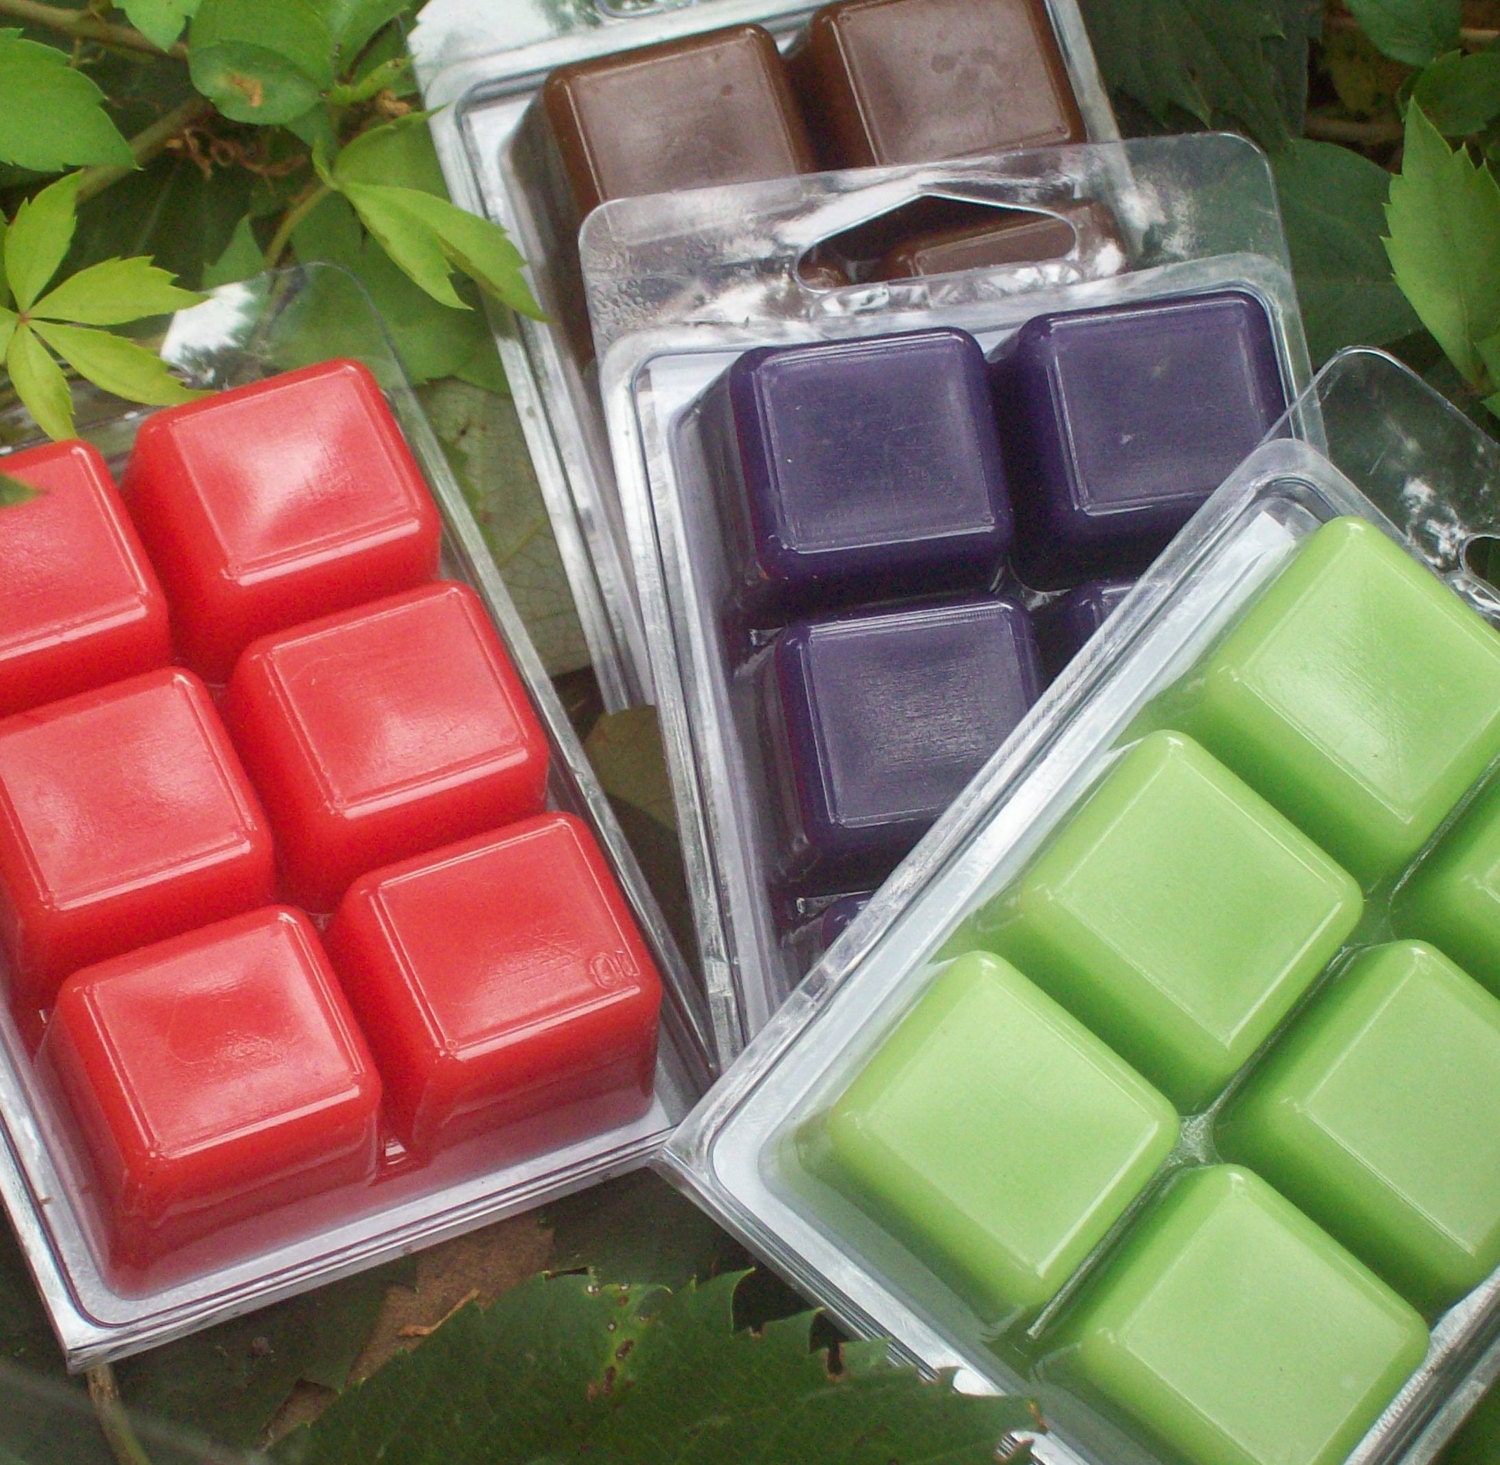 Wax Melts 6pc deal Strong scented wax melts your by CoquetteBath